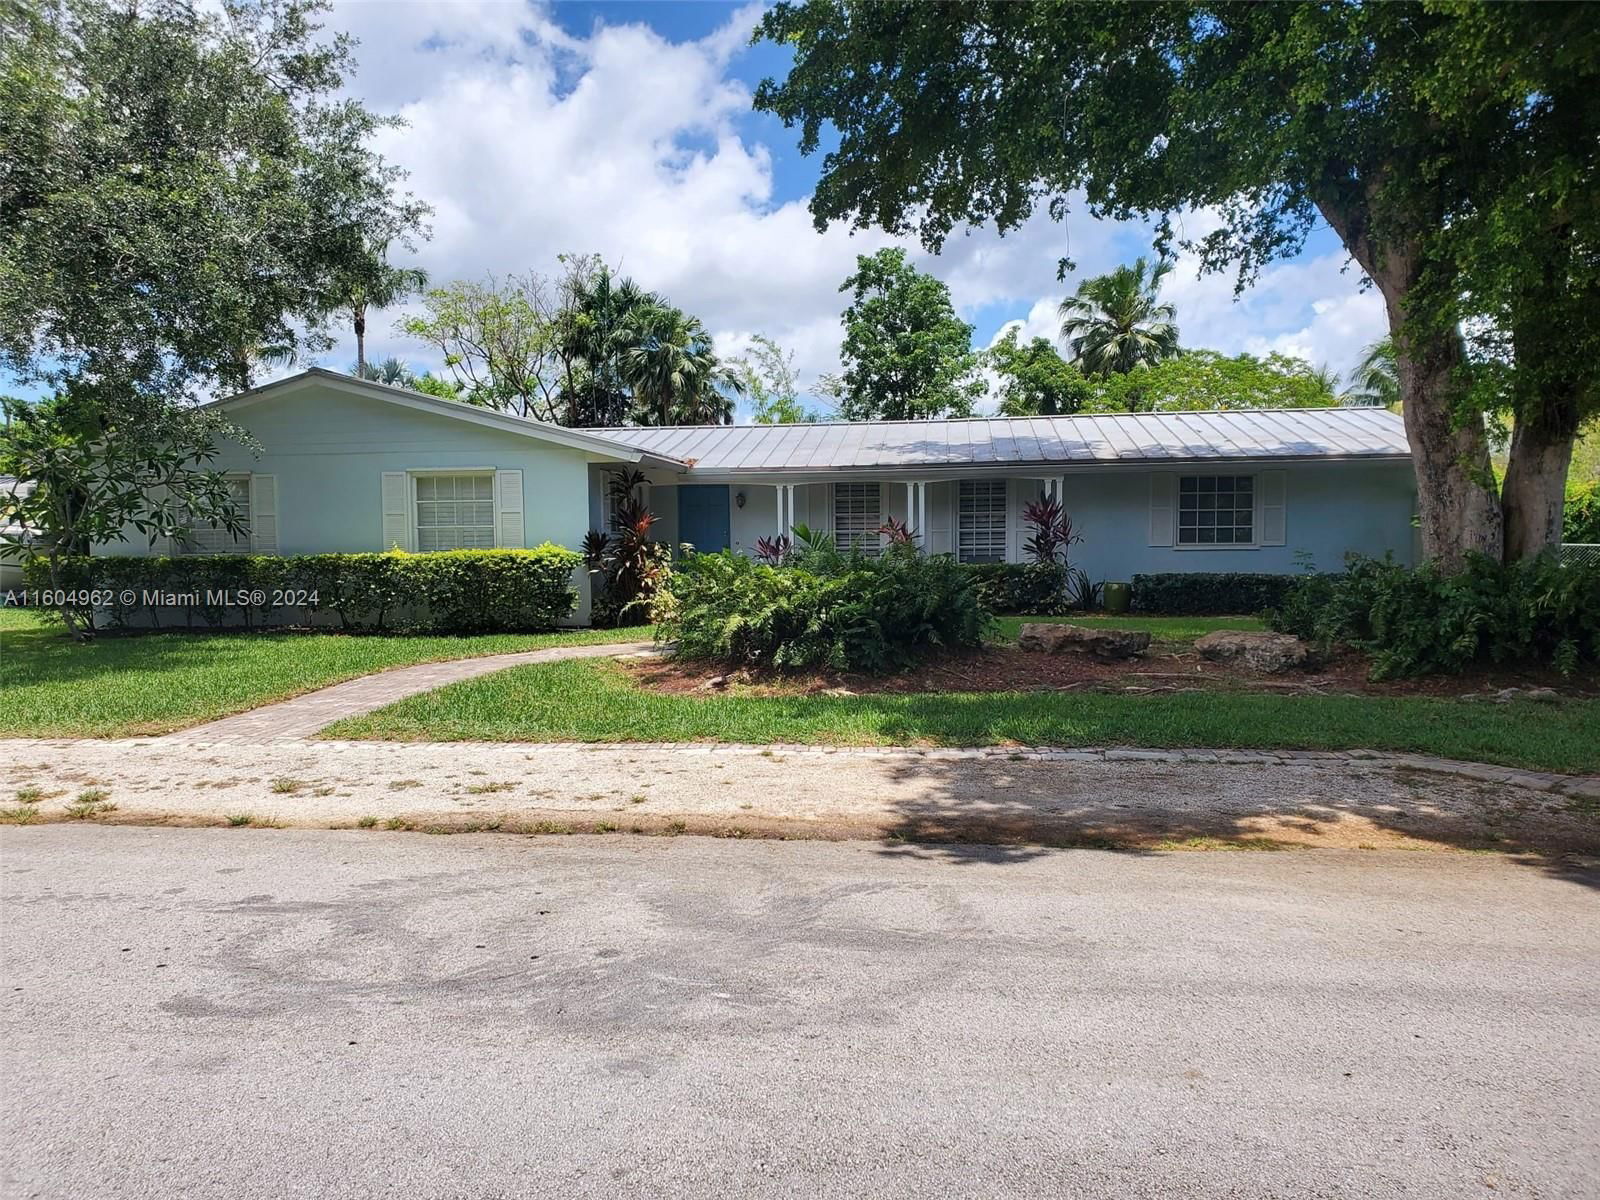 Real estate property located at 8305 169 ter, Miami-Dade County, OLD CUTLER WEST SEC 3 PB 9, Palmetto Bay, FL